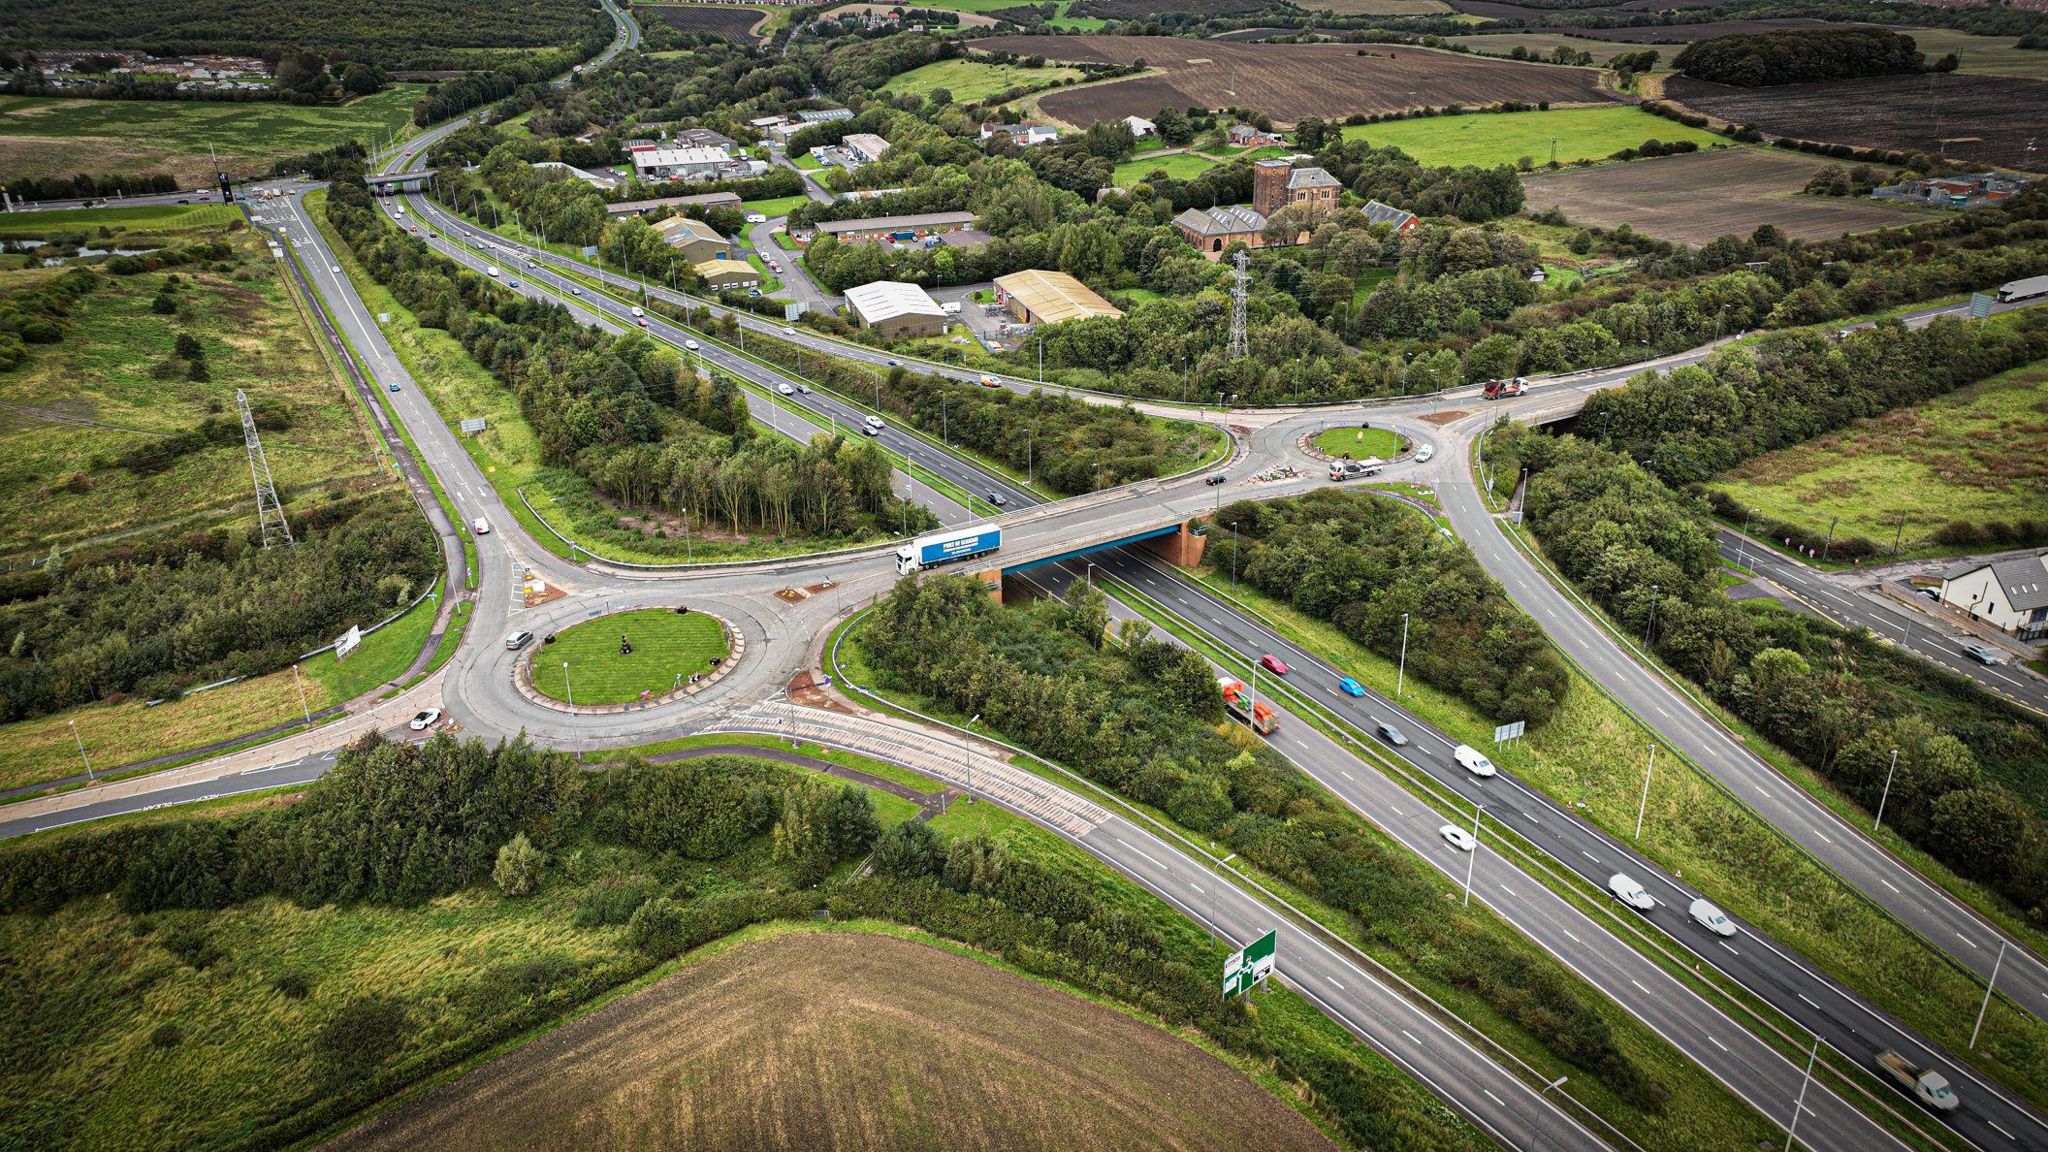 Improvement works at the A19/A182 junction will support the expansion of a nearby business park